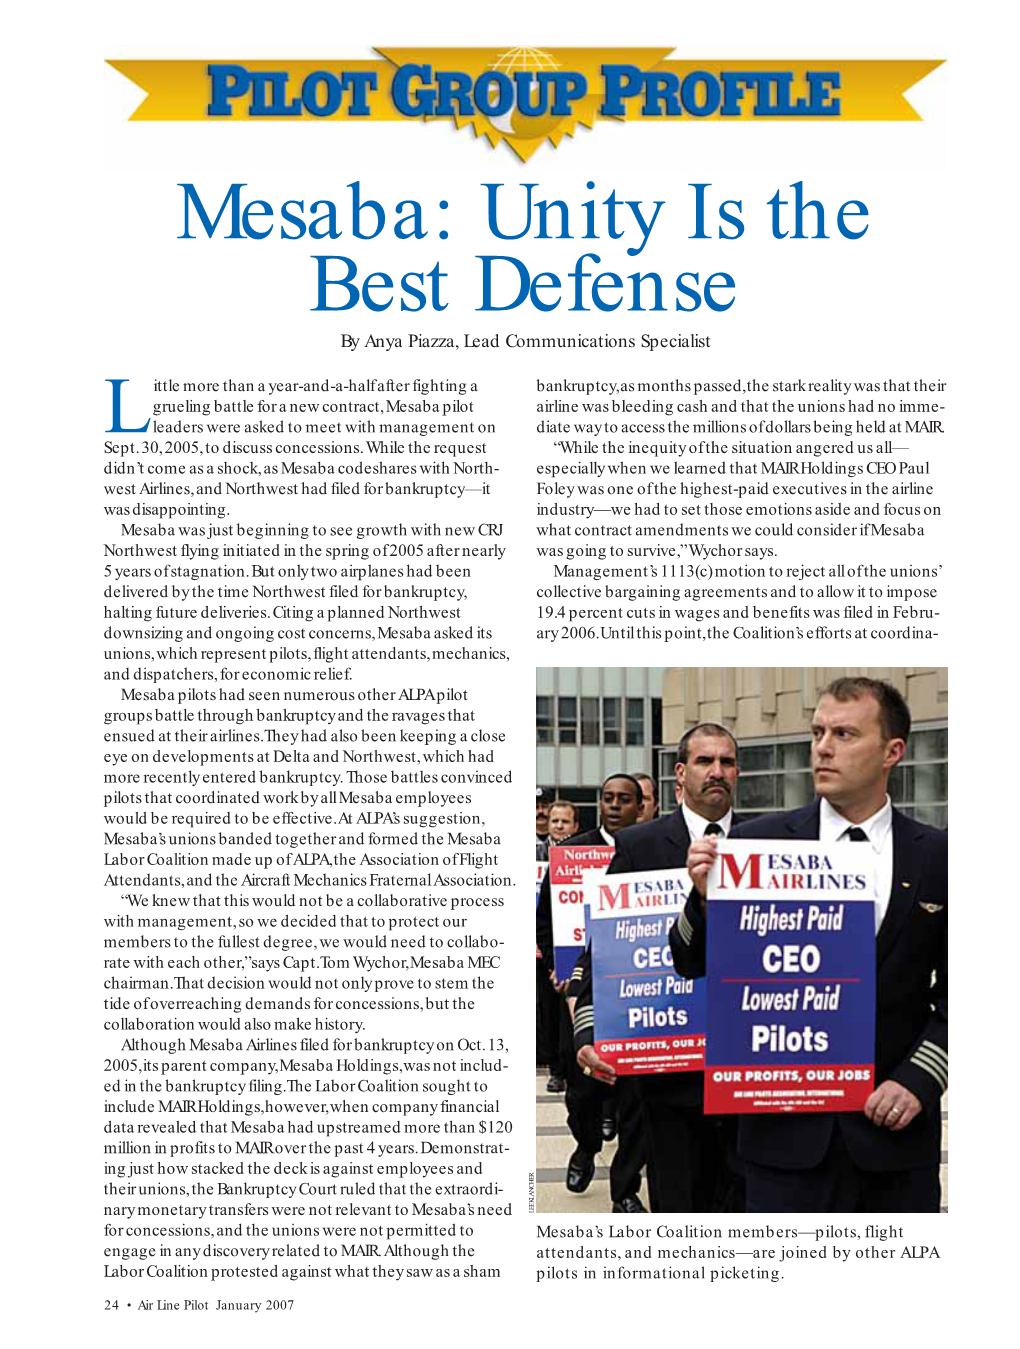 Mesaba: Unity Is the Best Defense by Anya Piazza, Lead Communications Specialist